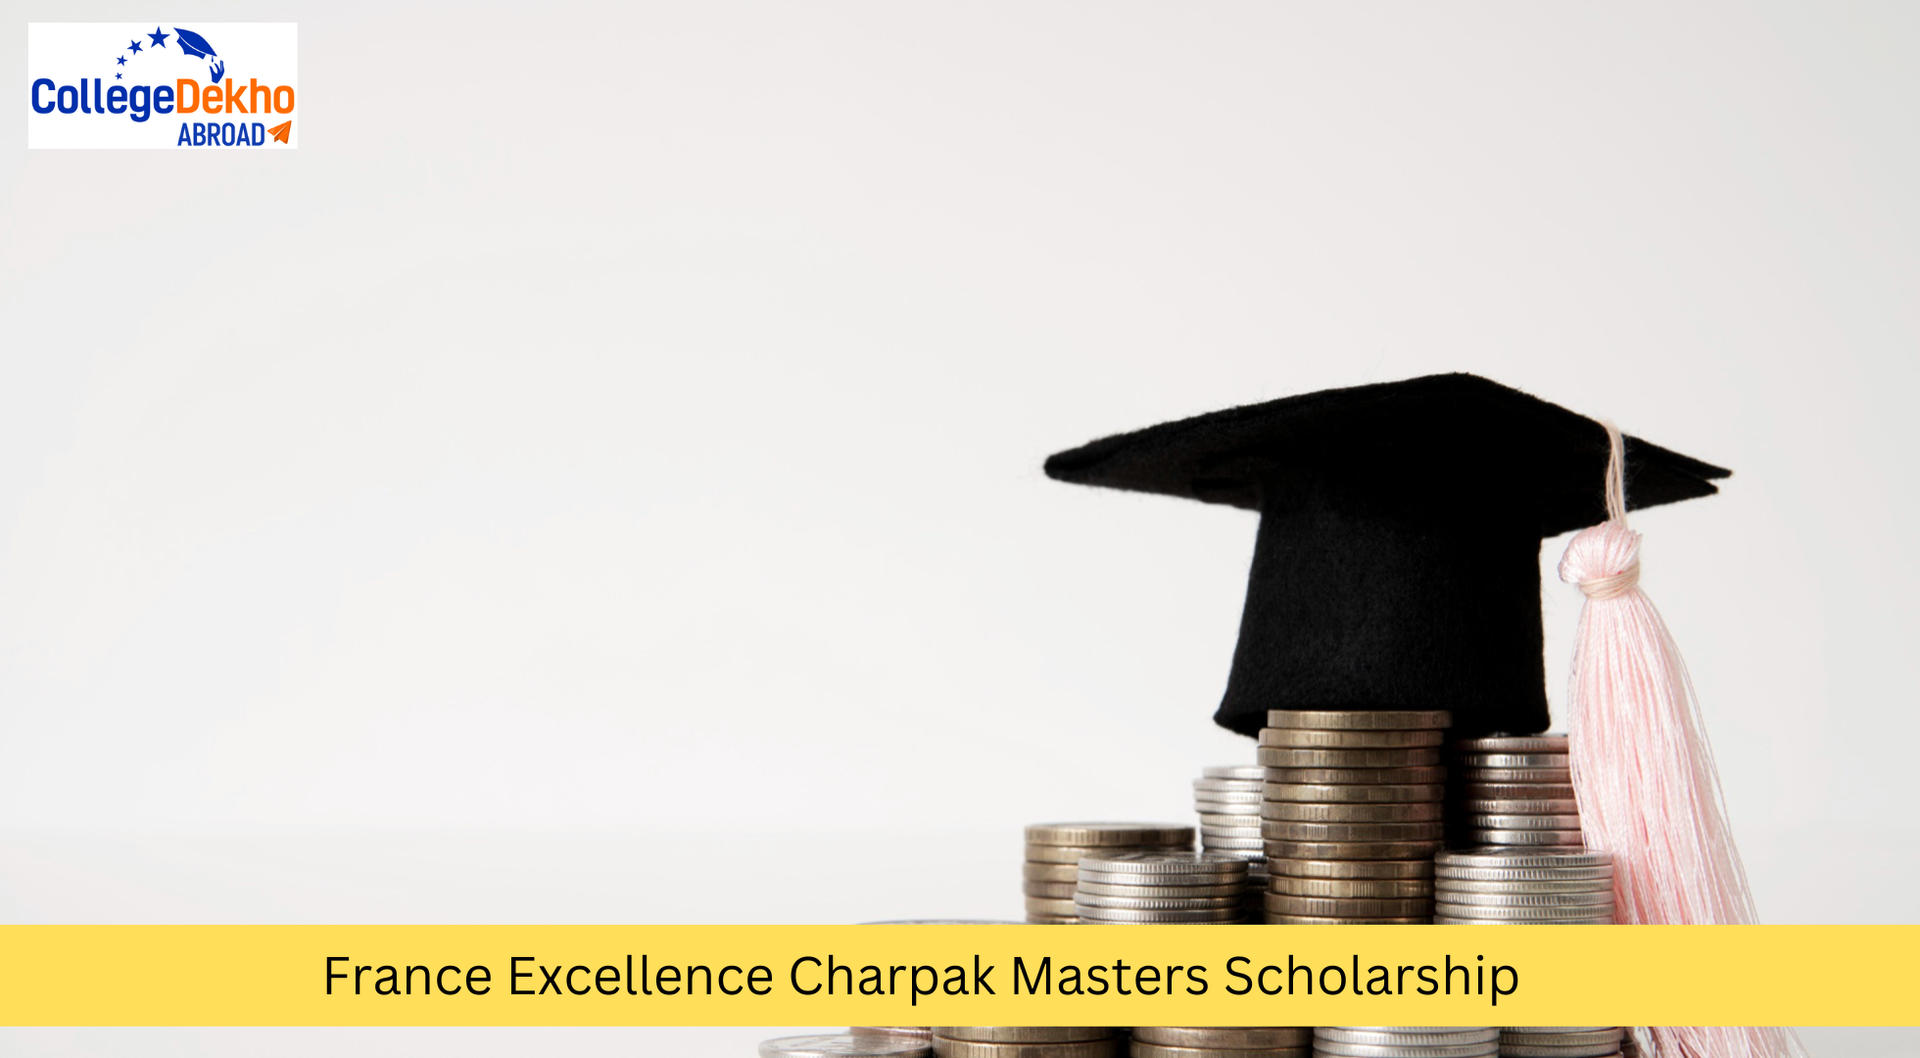 France Excellence Charpak Masters Scholarship